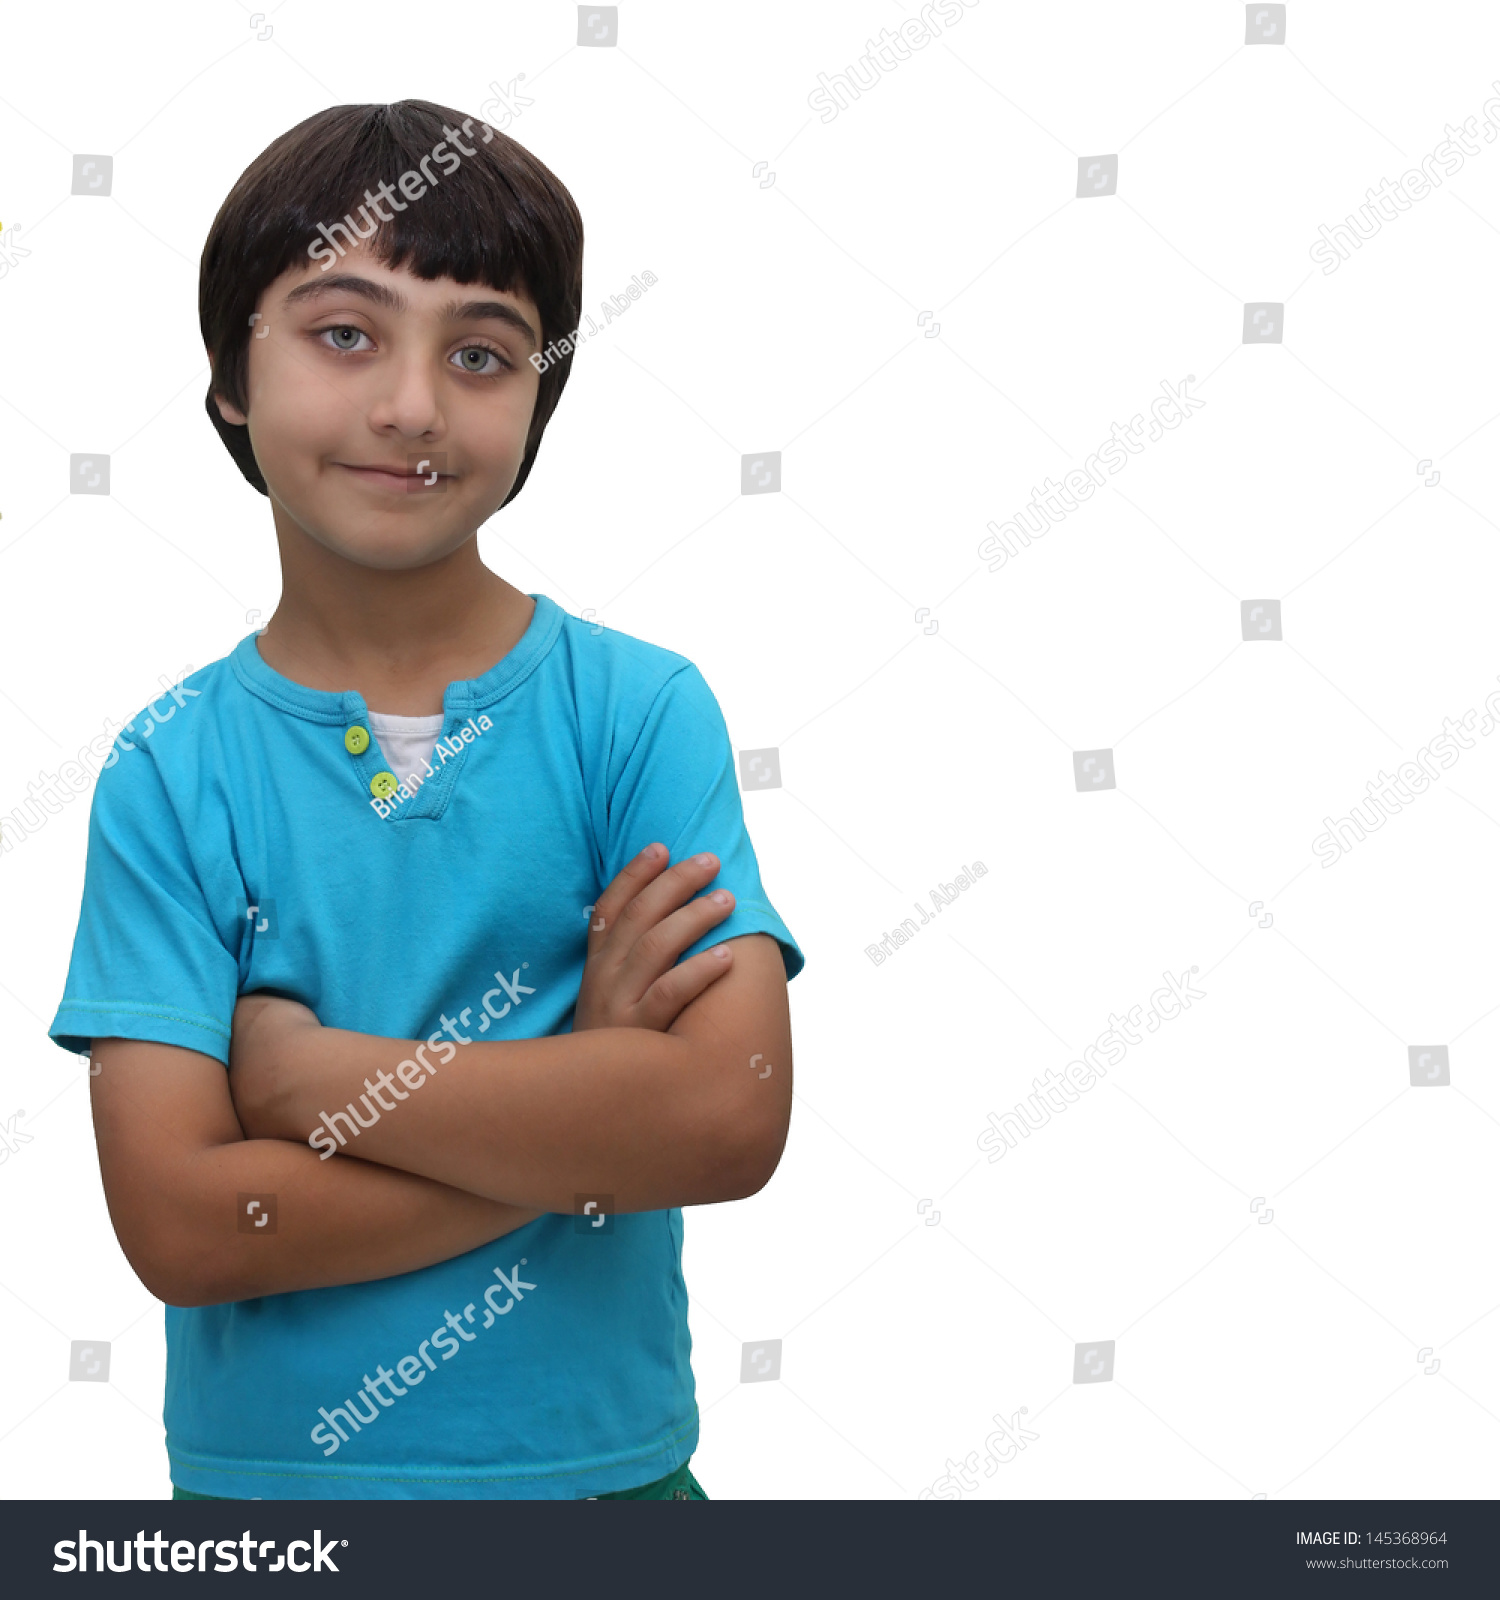 Young Brown Haired Boy Arms Crossed Stock Photo (Royalty Free ...